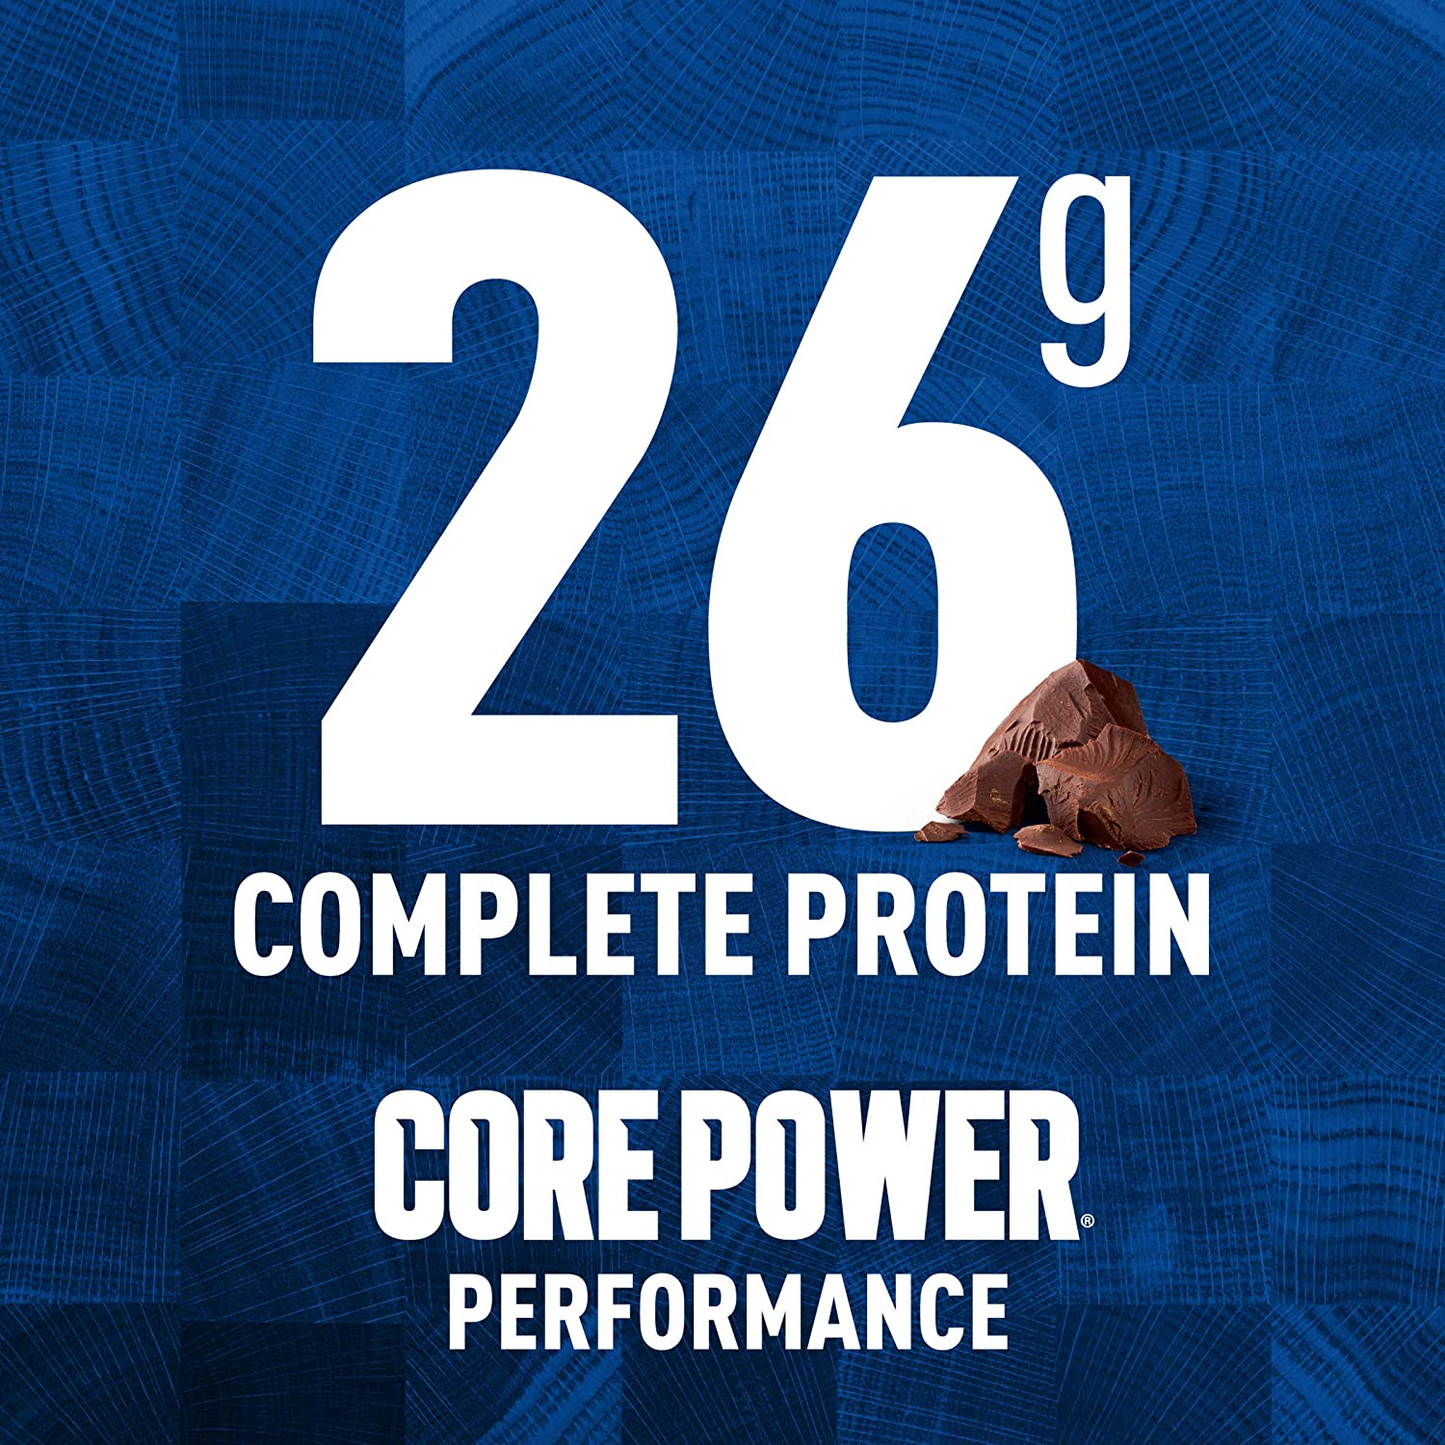 Core Power Protein Shakes (26G), Chocolate, No Artificial Sweeteners, Ready to Drink for Workout Recovery, 11.5 Fl Oz (Pack of 12) (Packaging May Vary)